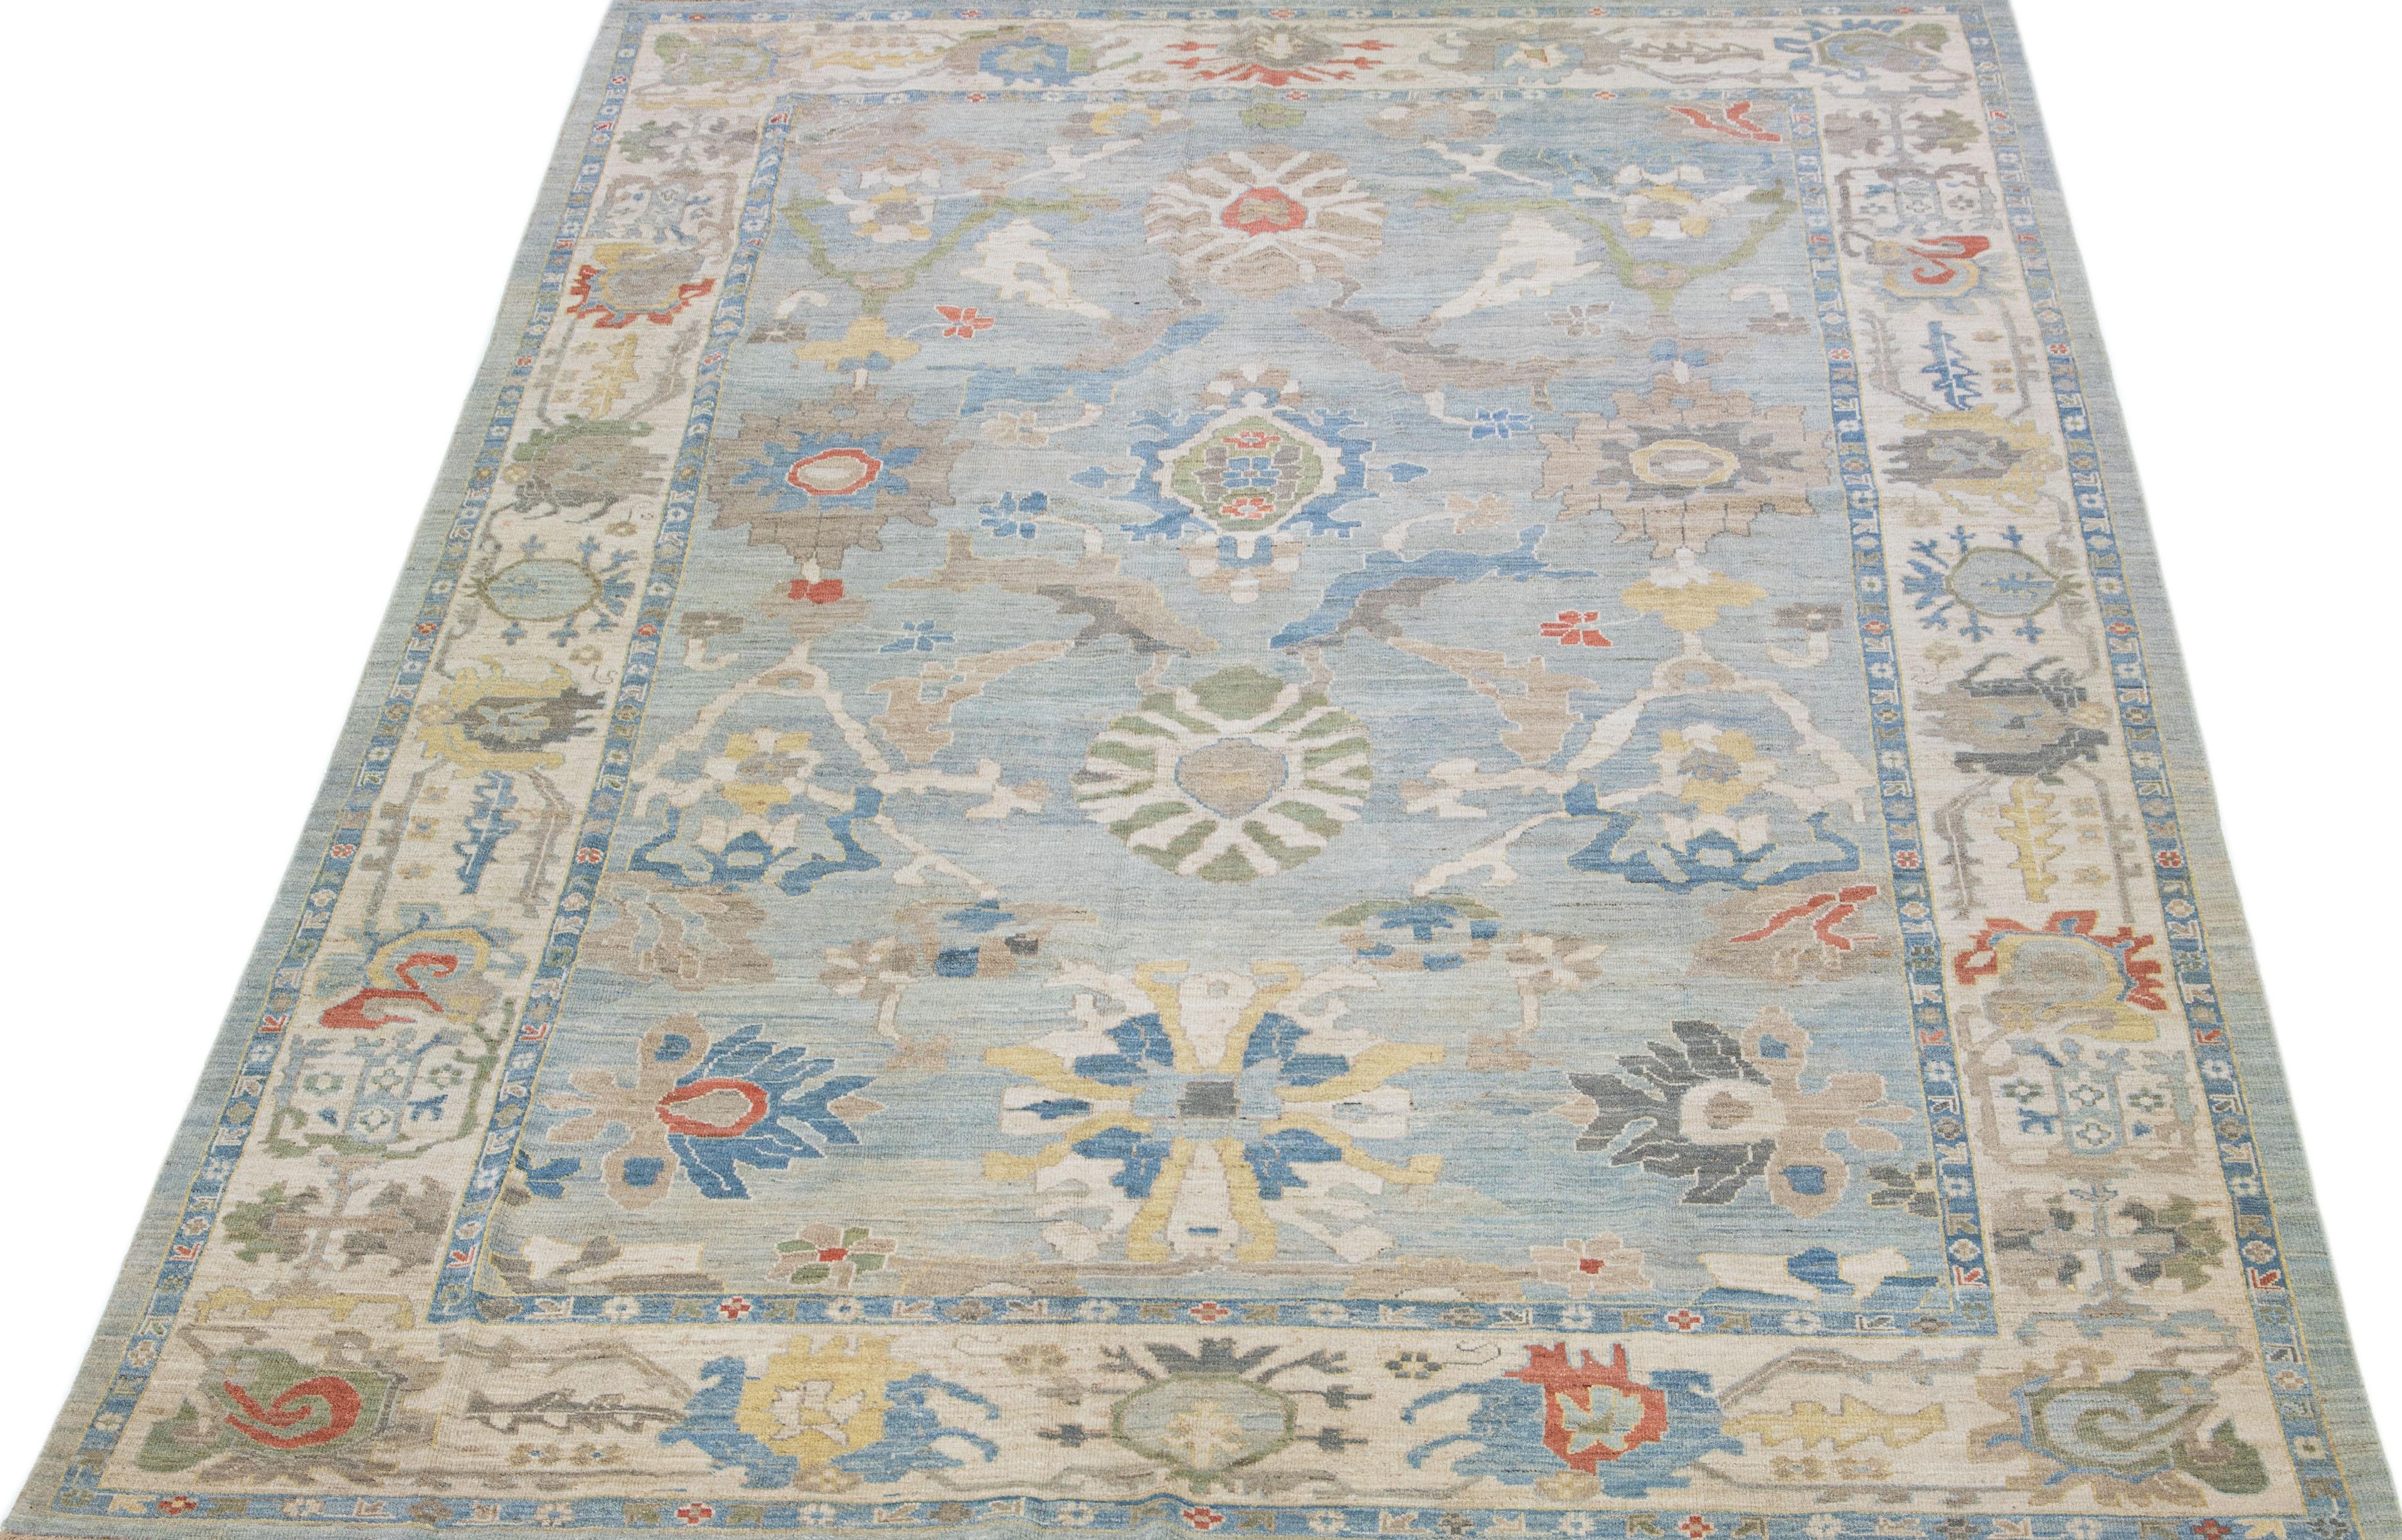 Beautiful modern Sultanabad hand knotted wool rug with a blue color field. This rug has a beige-designed frame with multicolor accents in a gorgeous all-over floral design.

This rug measures: 9'10